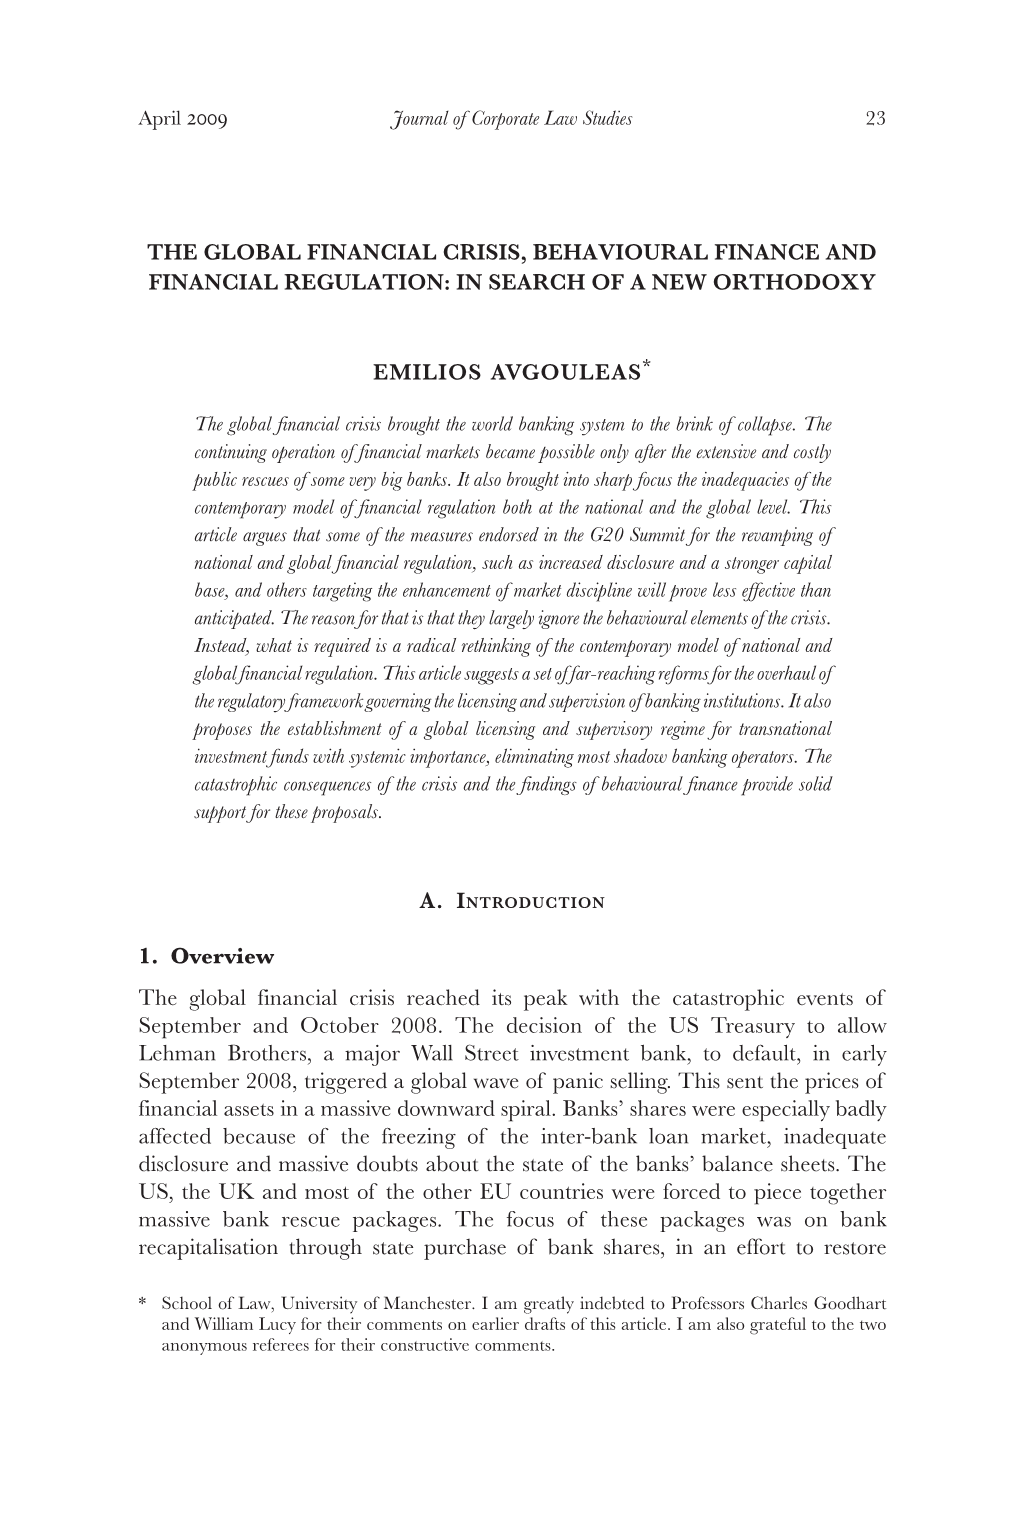 The Global Financial Crisis, Behavioural Finance and Financial Regulation: in Search of a New Orthodoxy